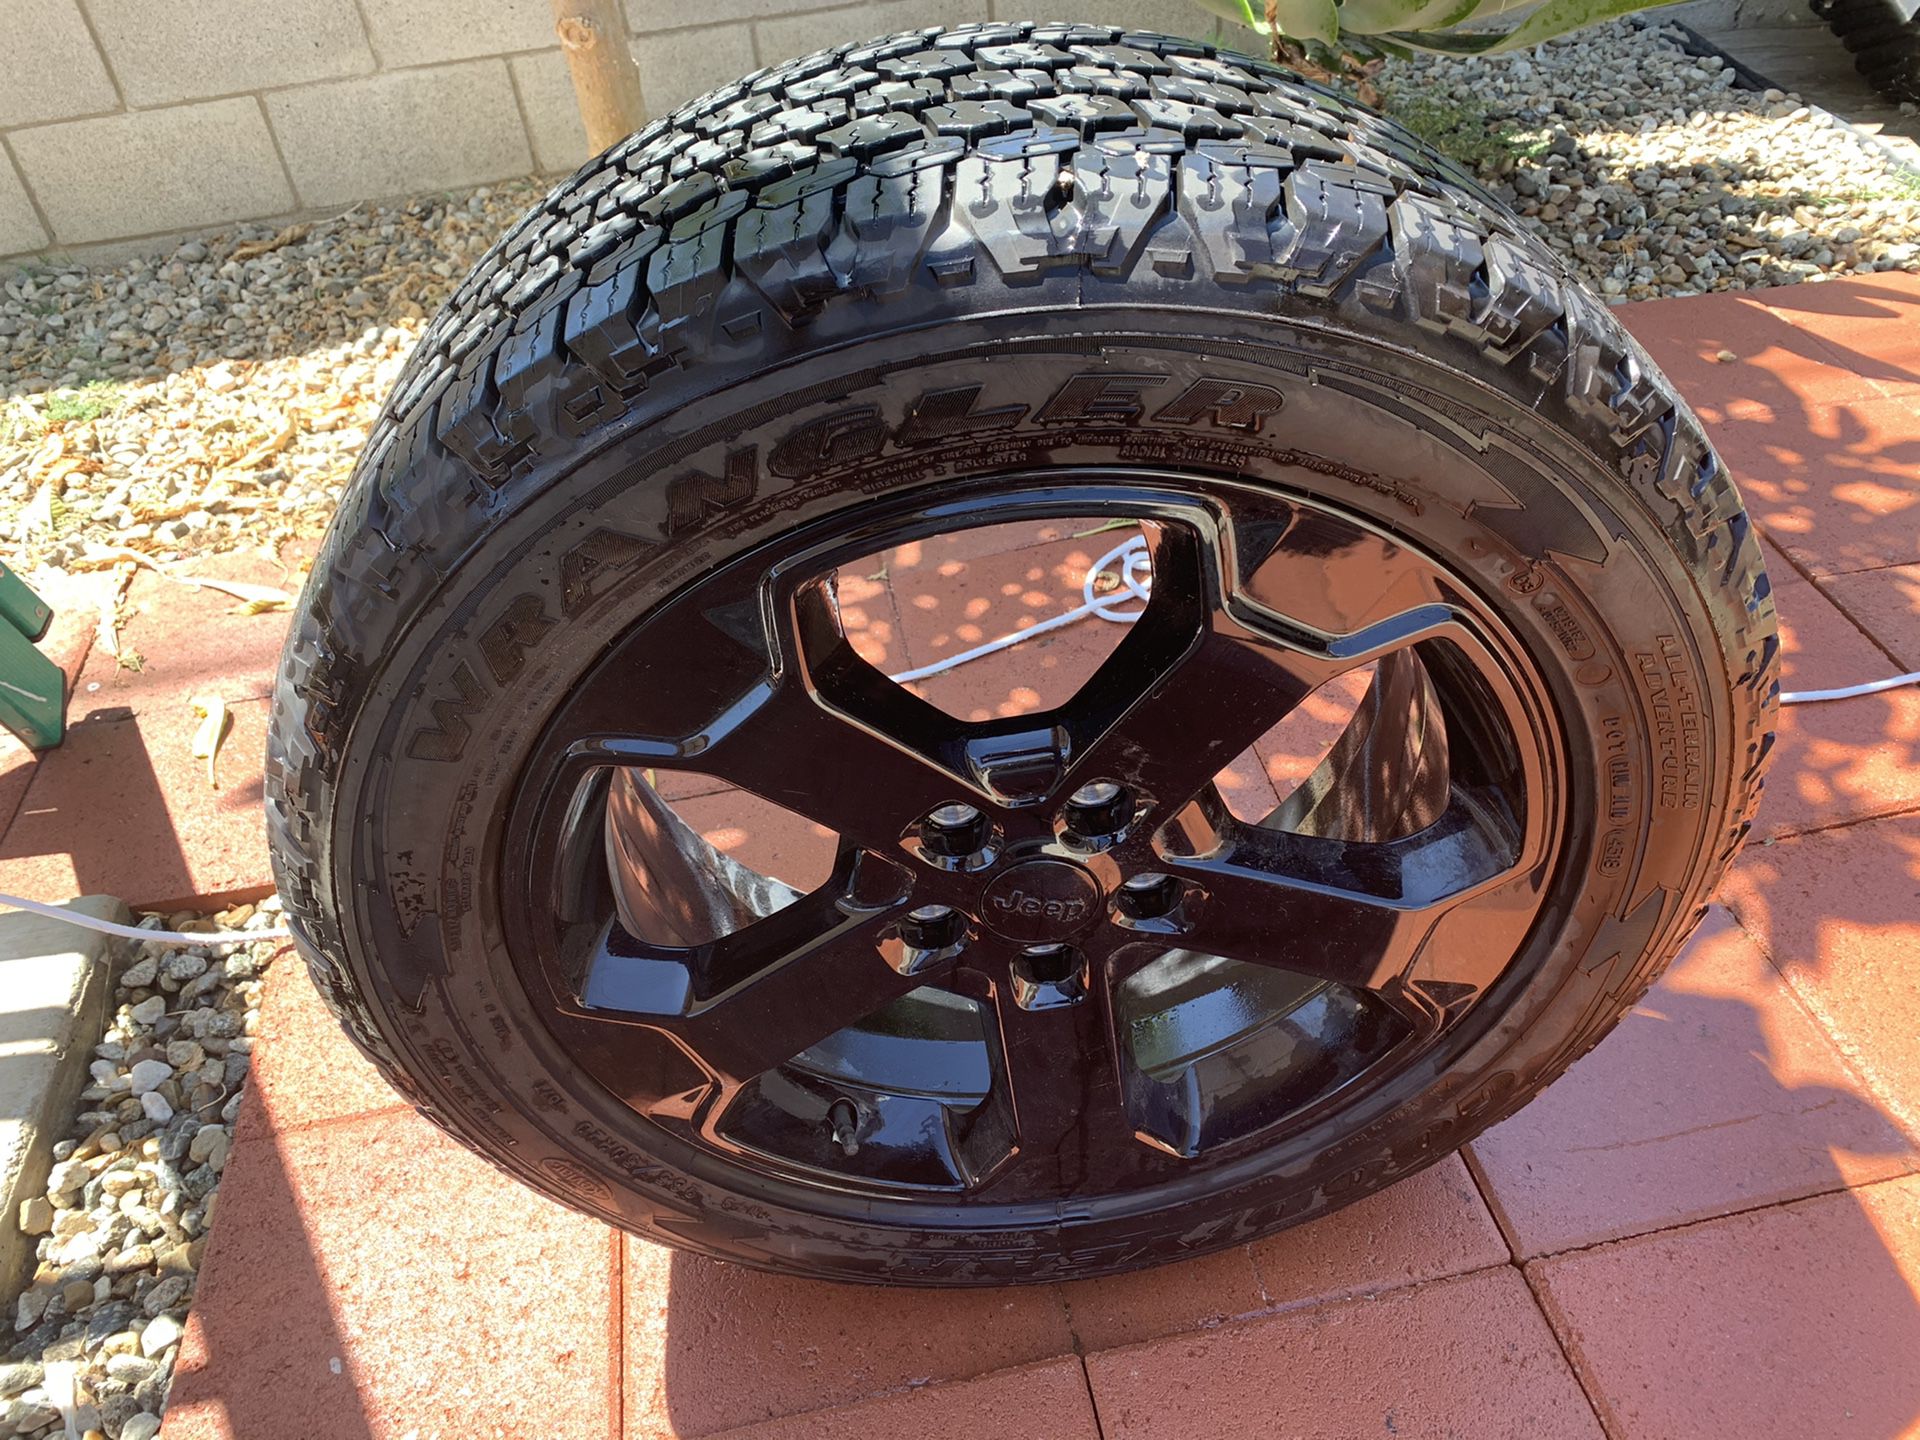 Jeep Wheel 20 inch Rim Tire 265 50 20 Tire is brand new Rim is brand new Comes with Sensor Center cap 1 only Goodyear good year brand Wrangler A